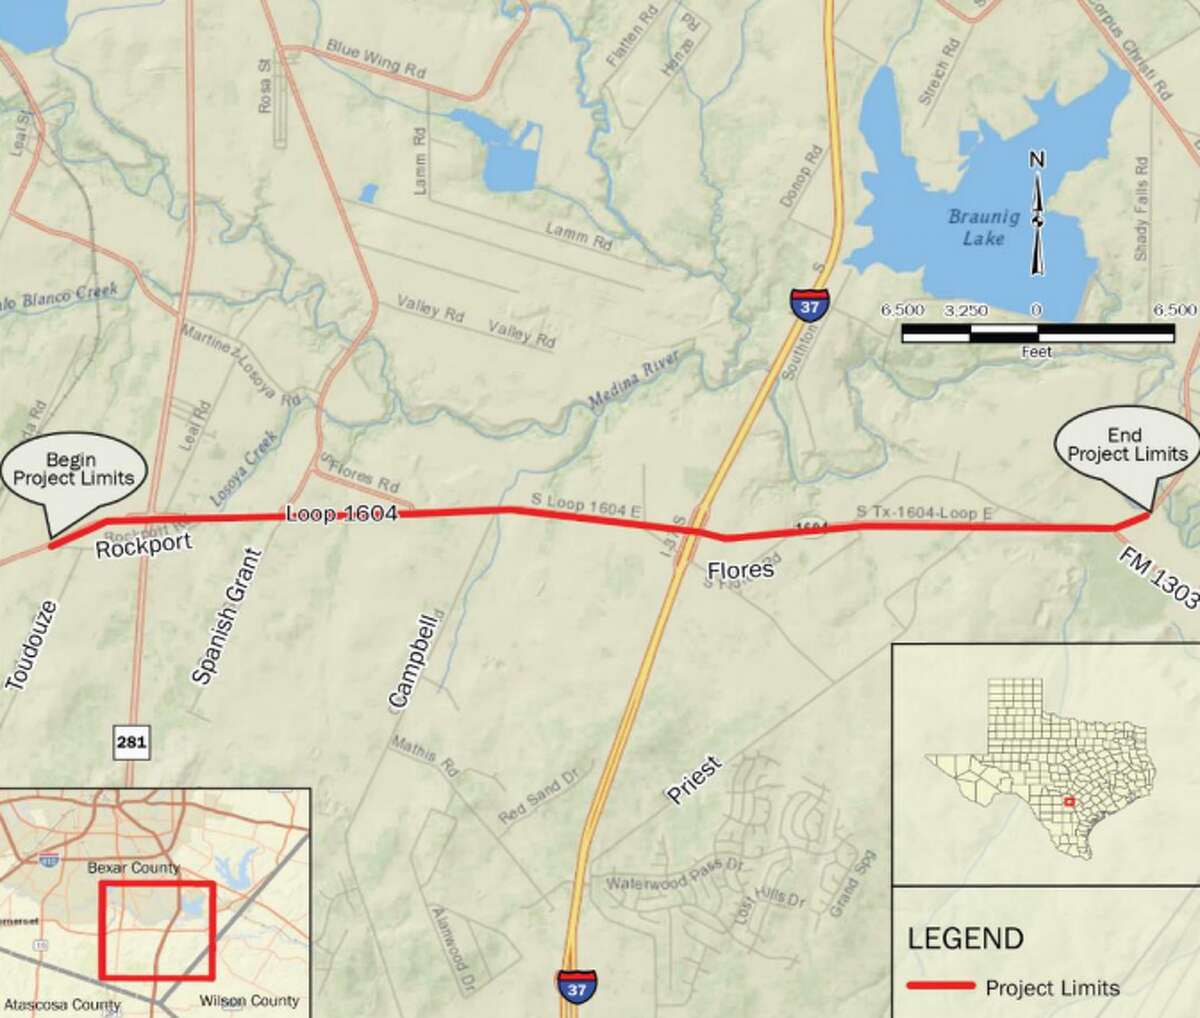 Loop 1604 from U.S. 281 to FM 1303: The project is to expand Loop 1604 from a two-lane to a four-lane divided roadway with shoulders. Estimated completion date: November 2020